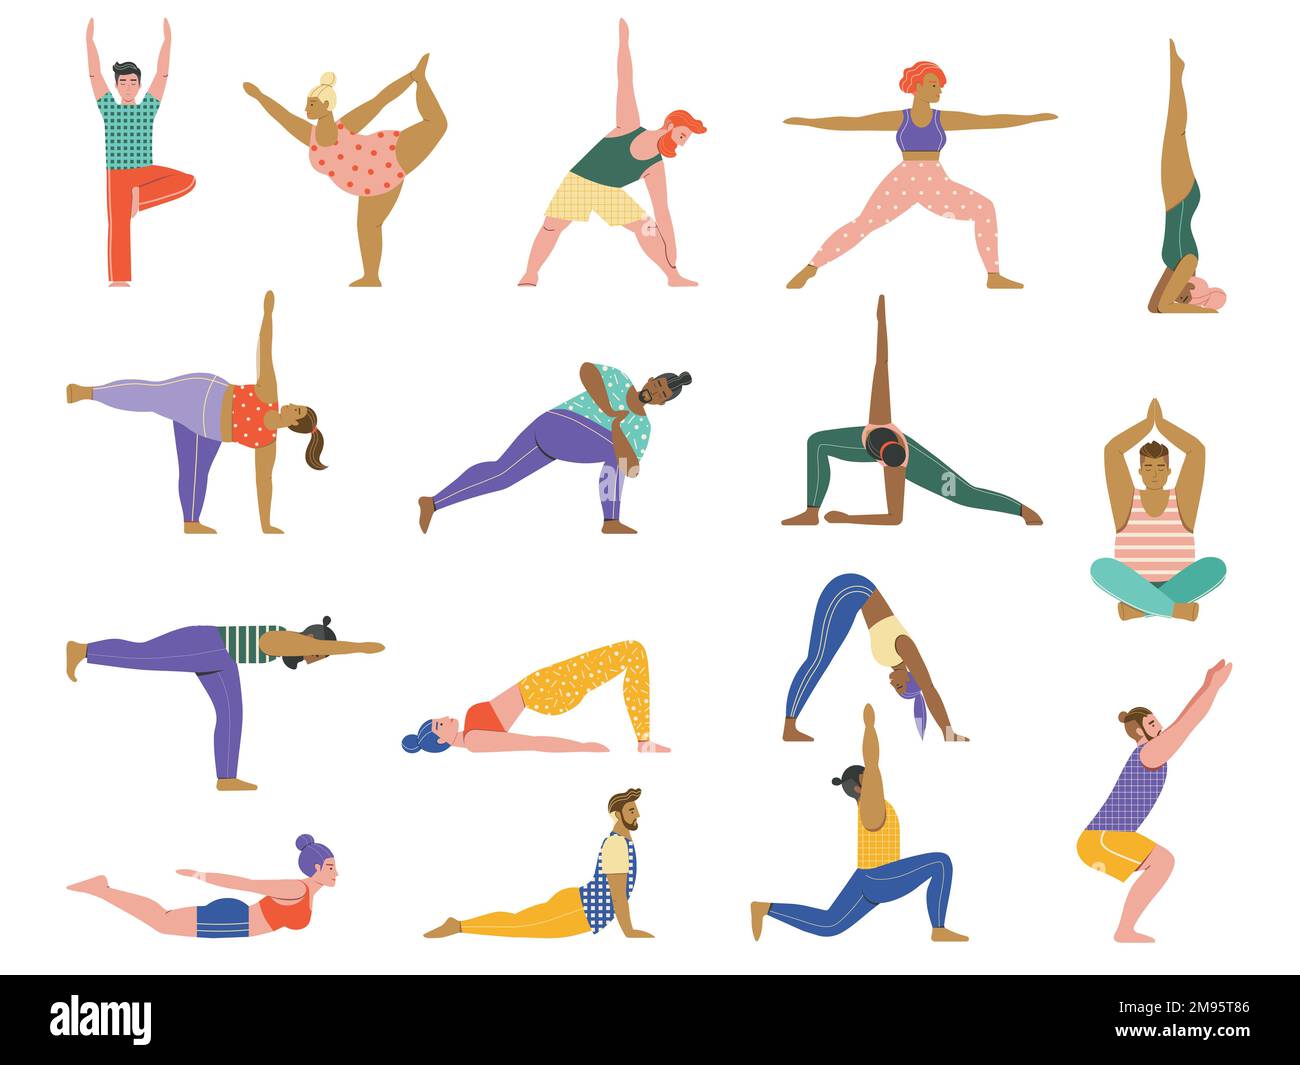 Start a Skillful Home Practice: The Basics of Yoga Sequencing